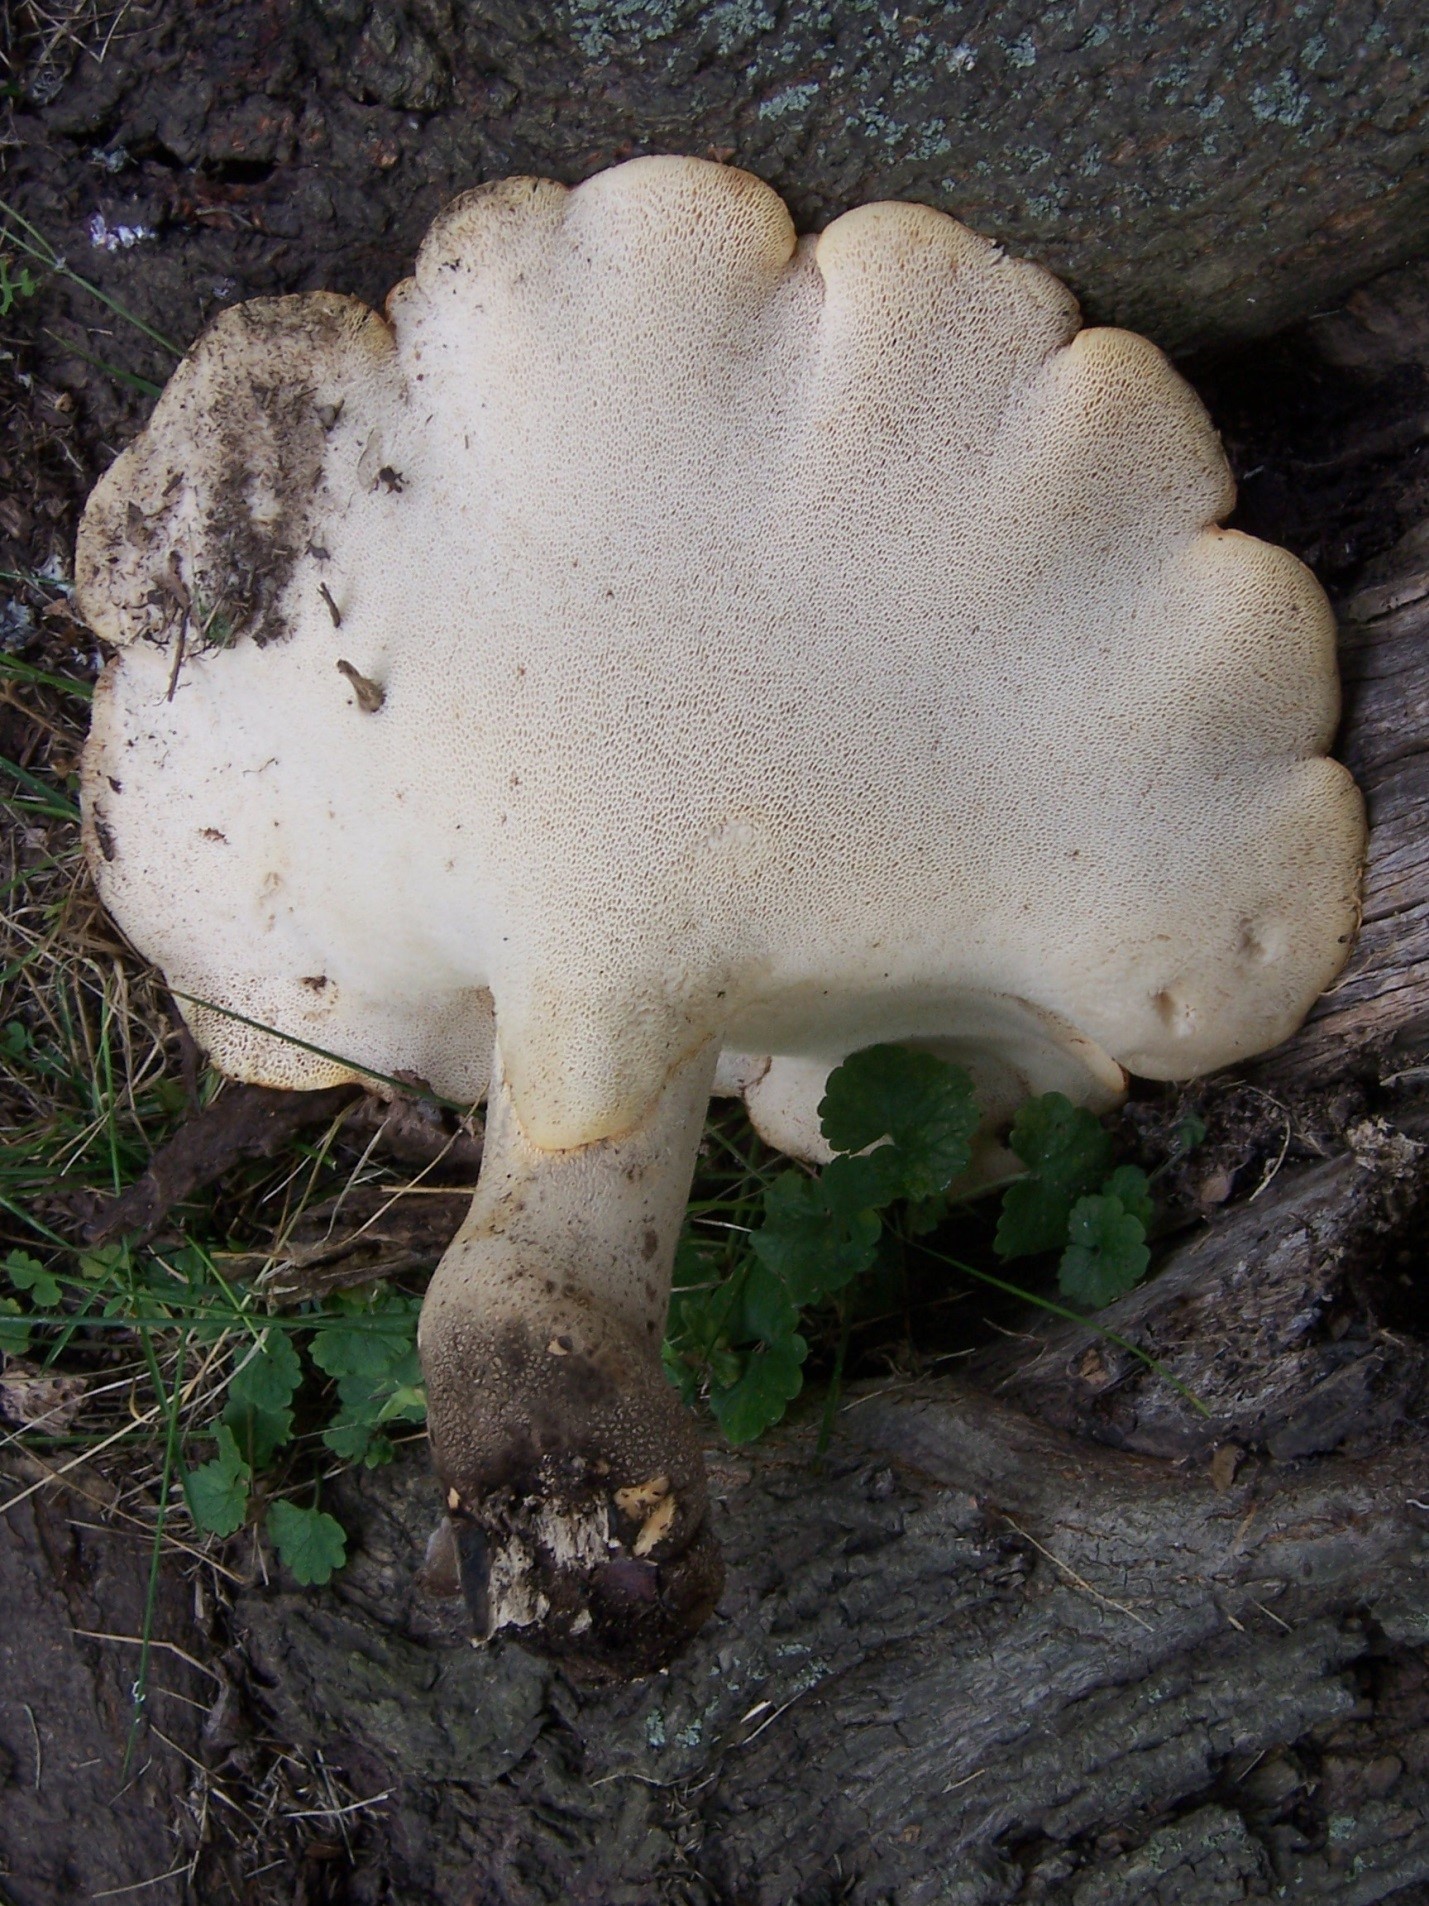 Photograph 2. Lateral (attached on the side of the mushroom) stem of an annual wood decay fungus.